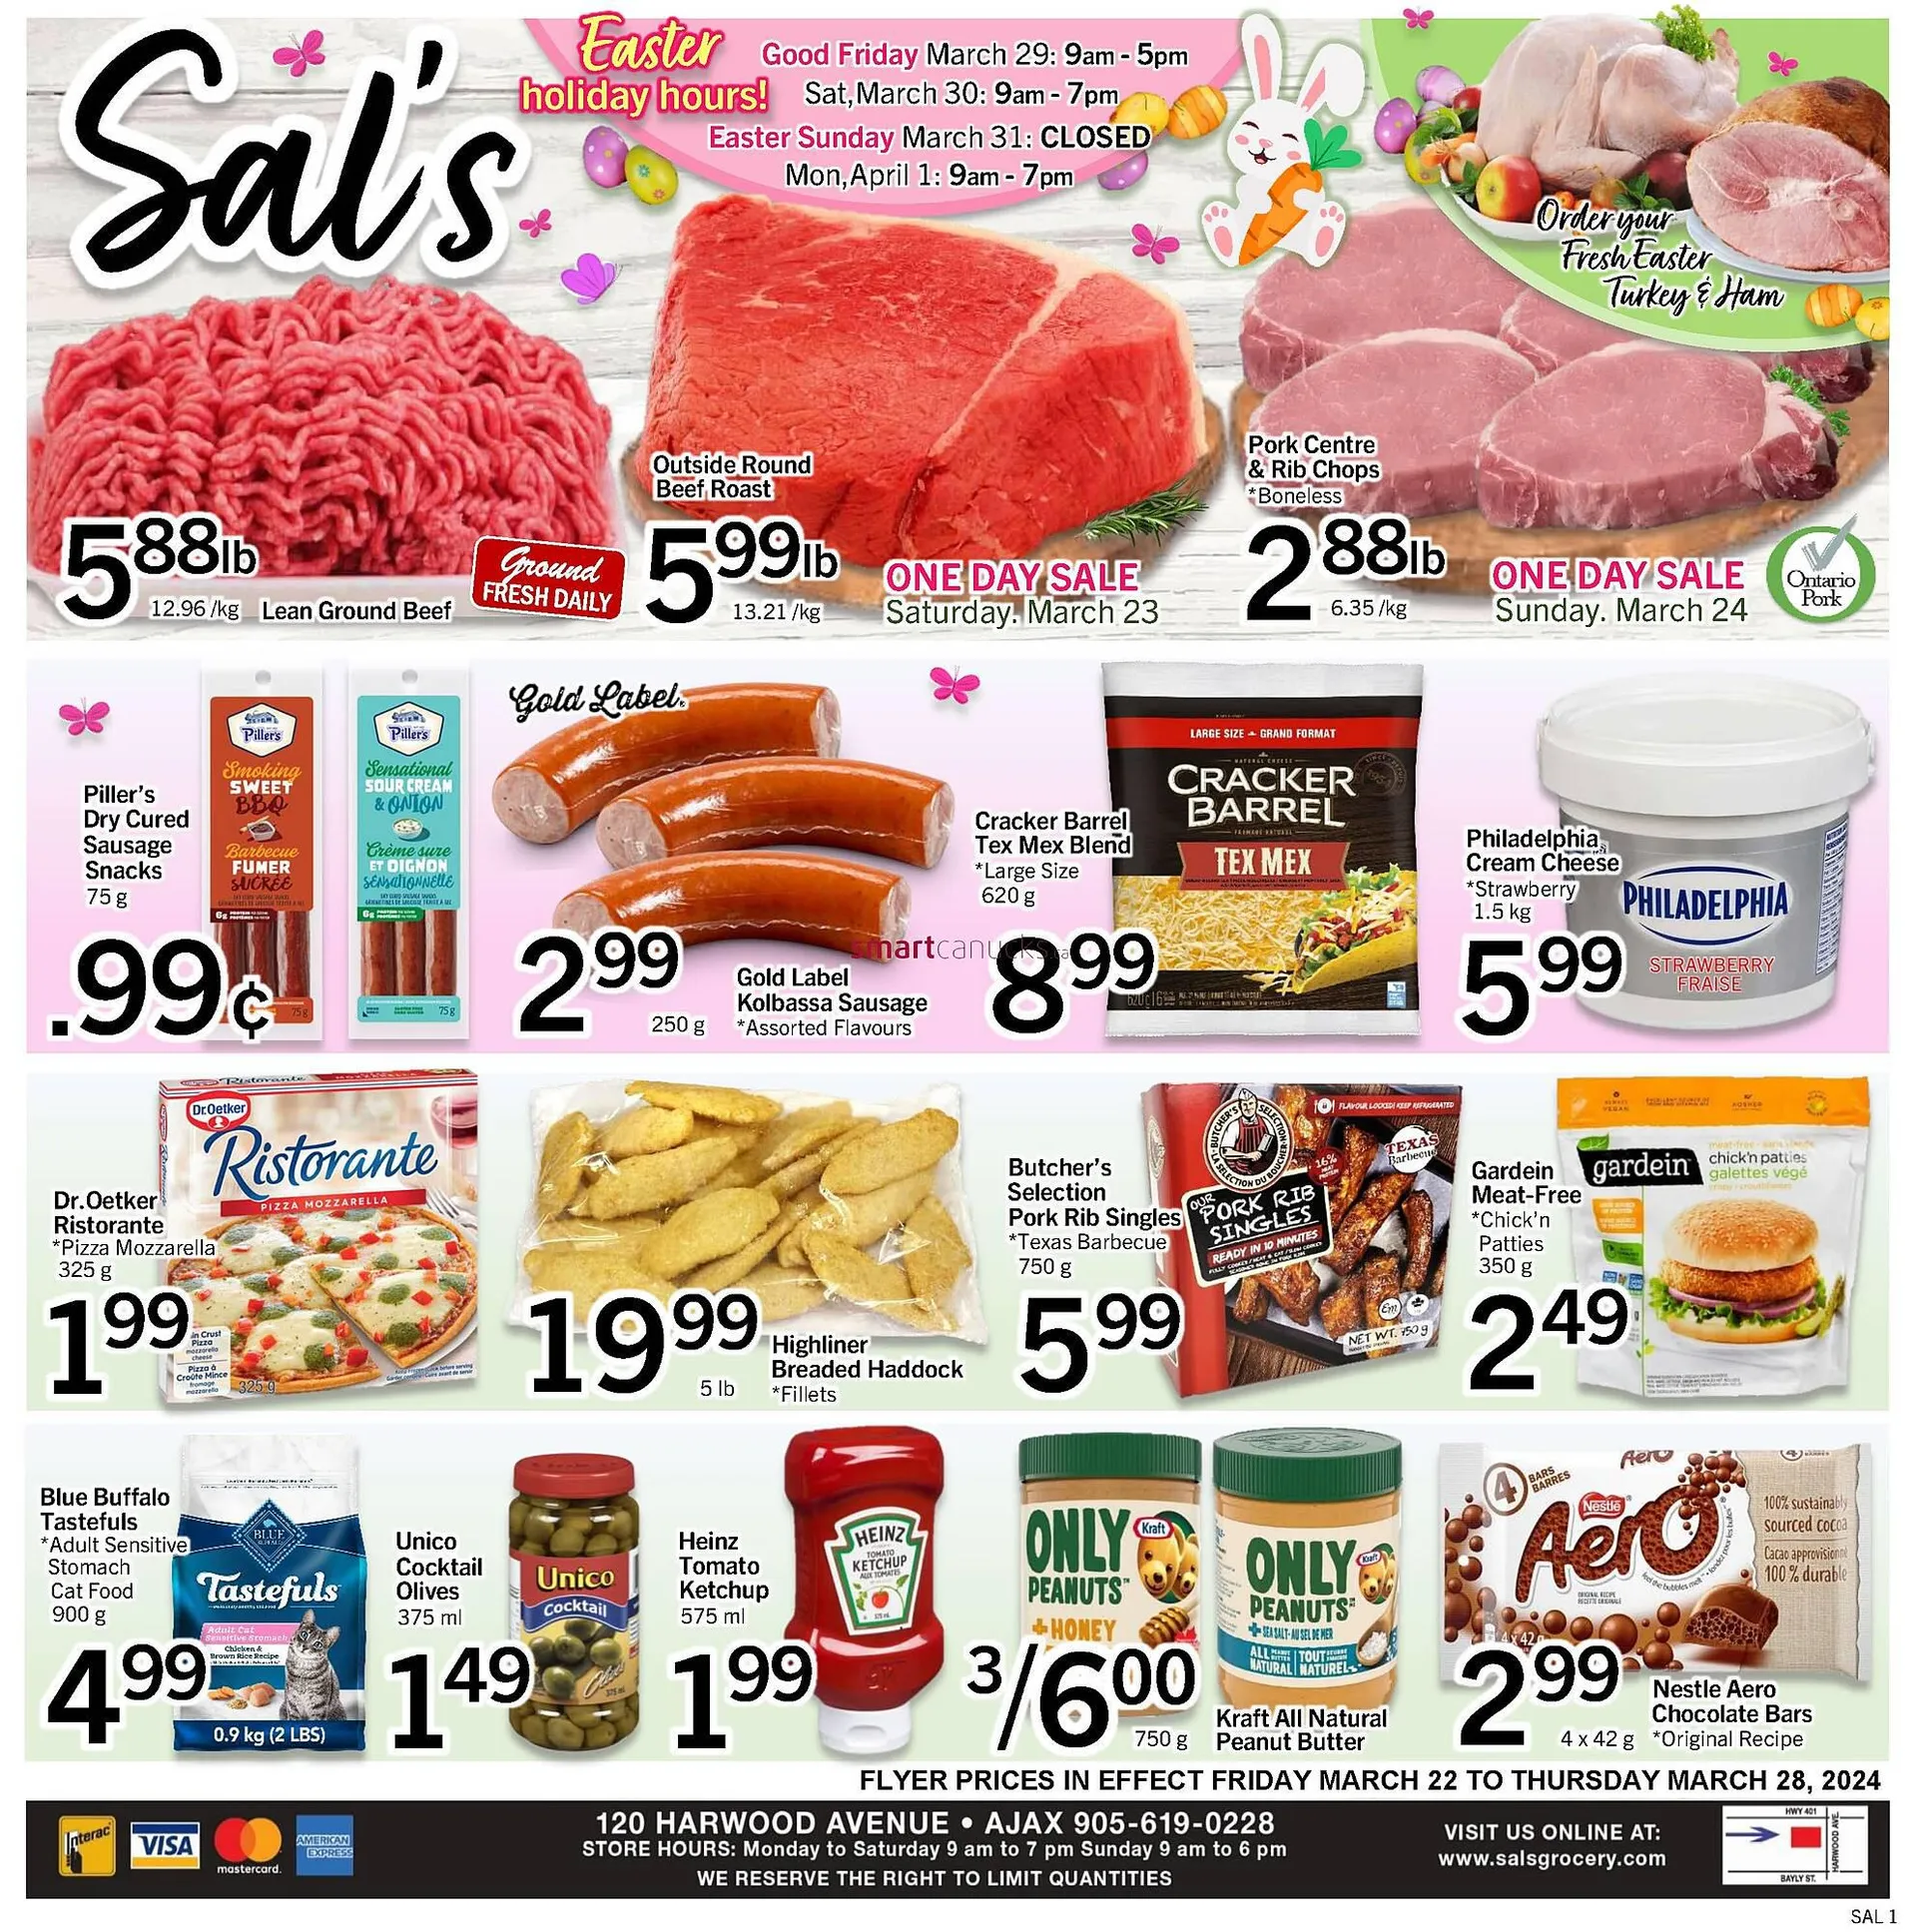 Sal's Grocery flyer from March 22 to March 28 2024 - flyer page 1